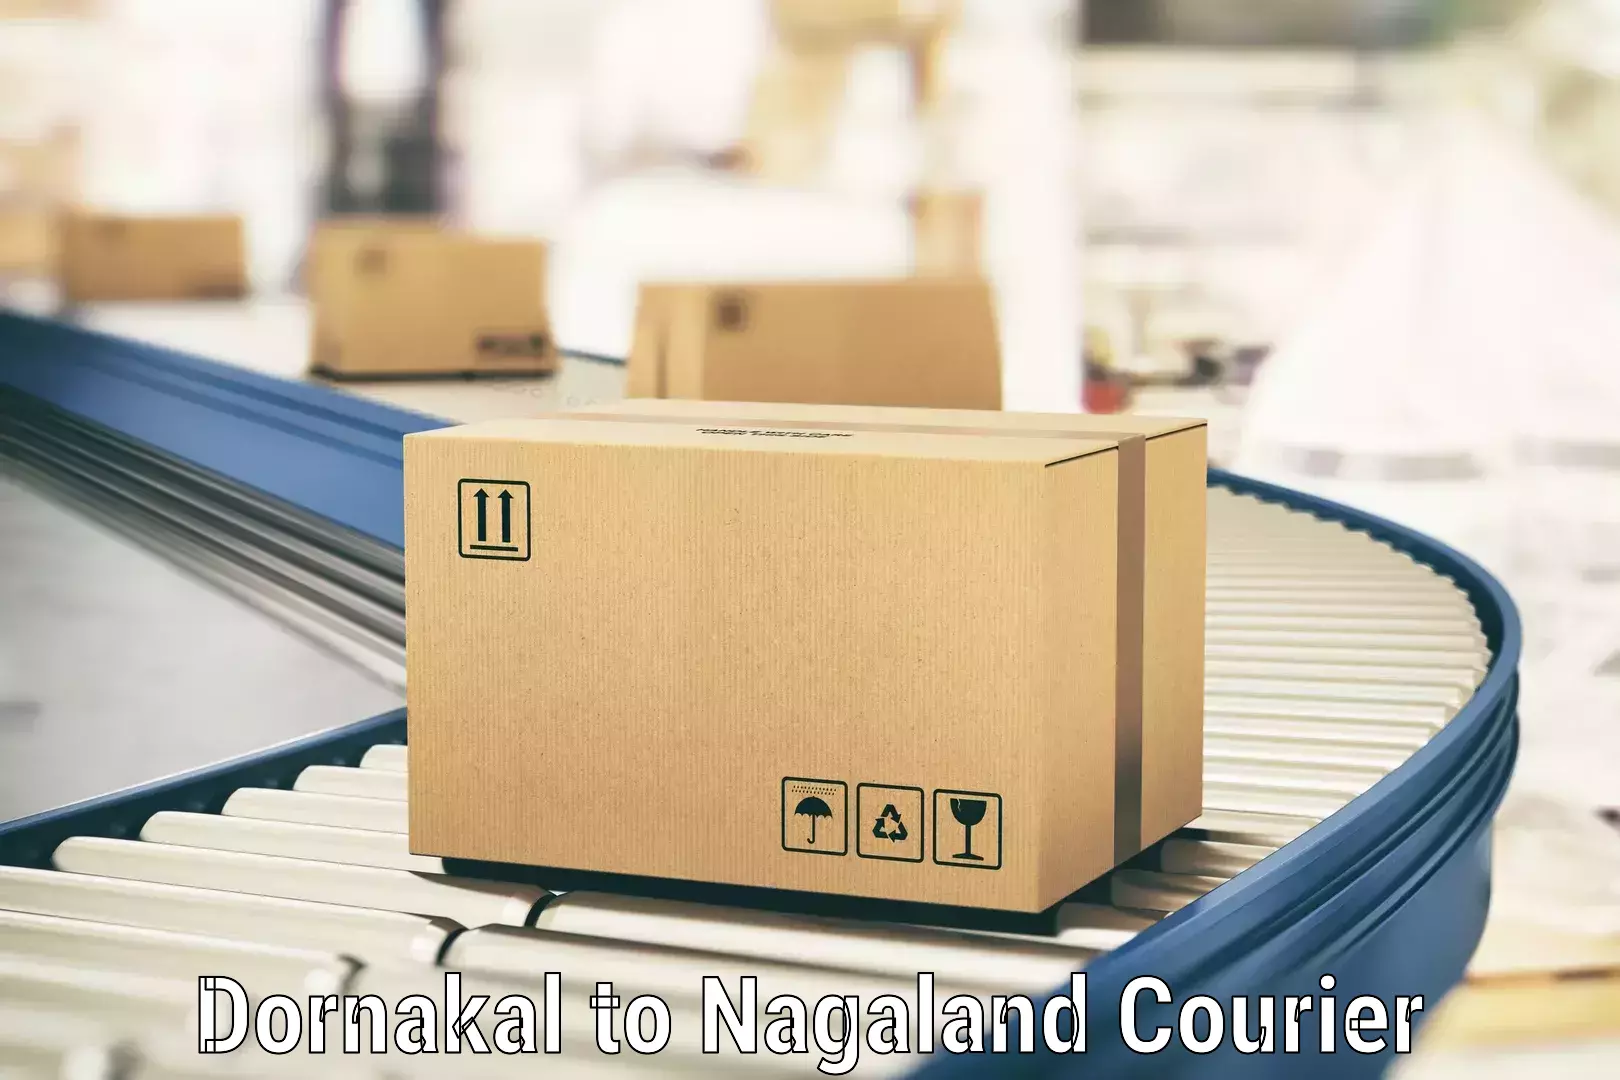 Secure freight services Dornakal to Nagaland